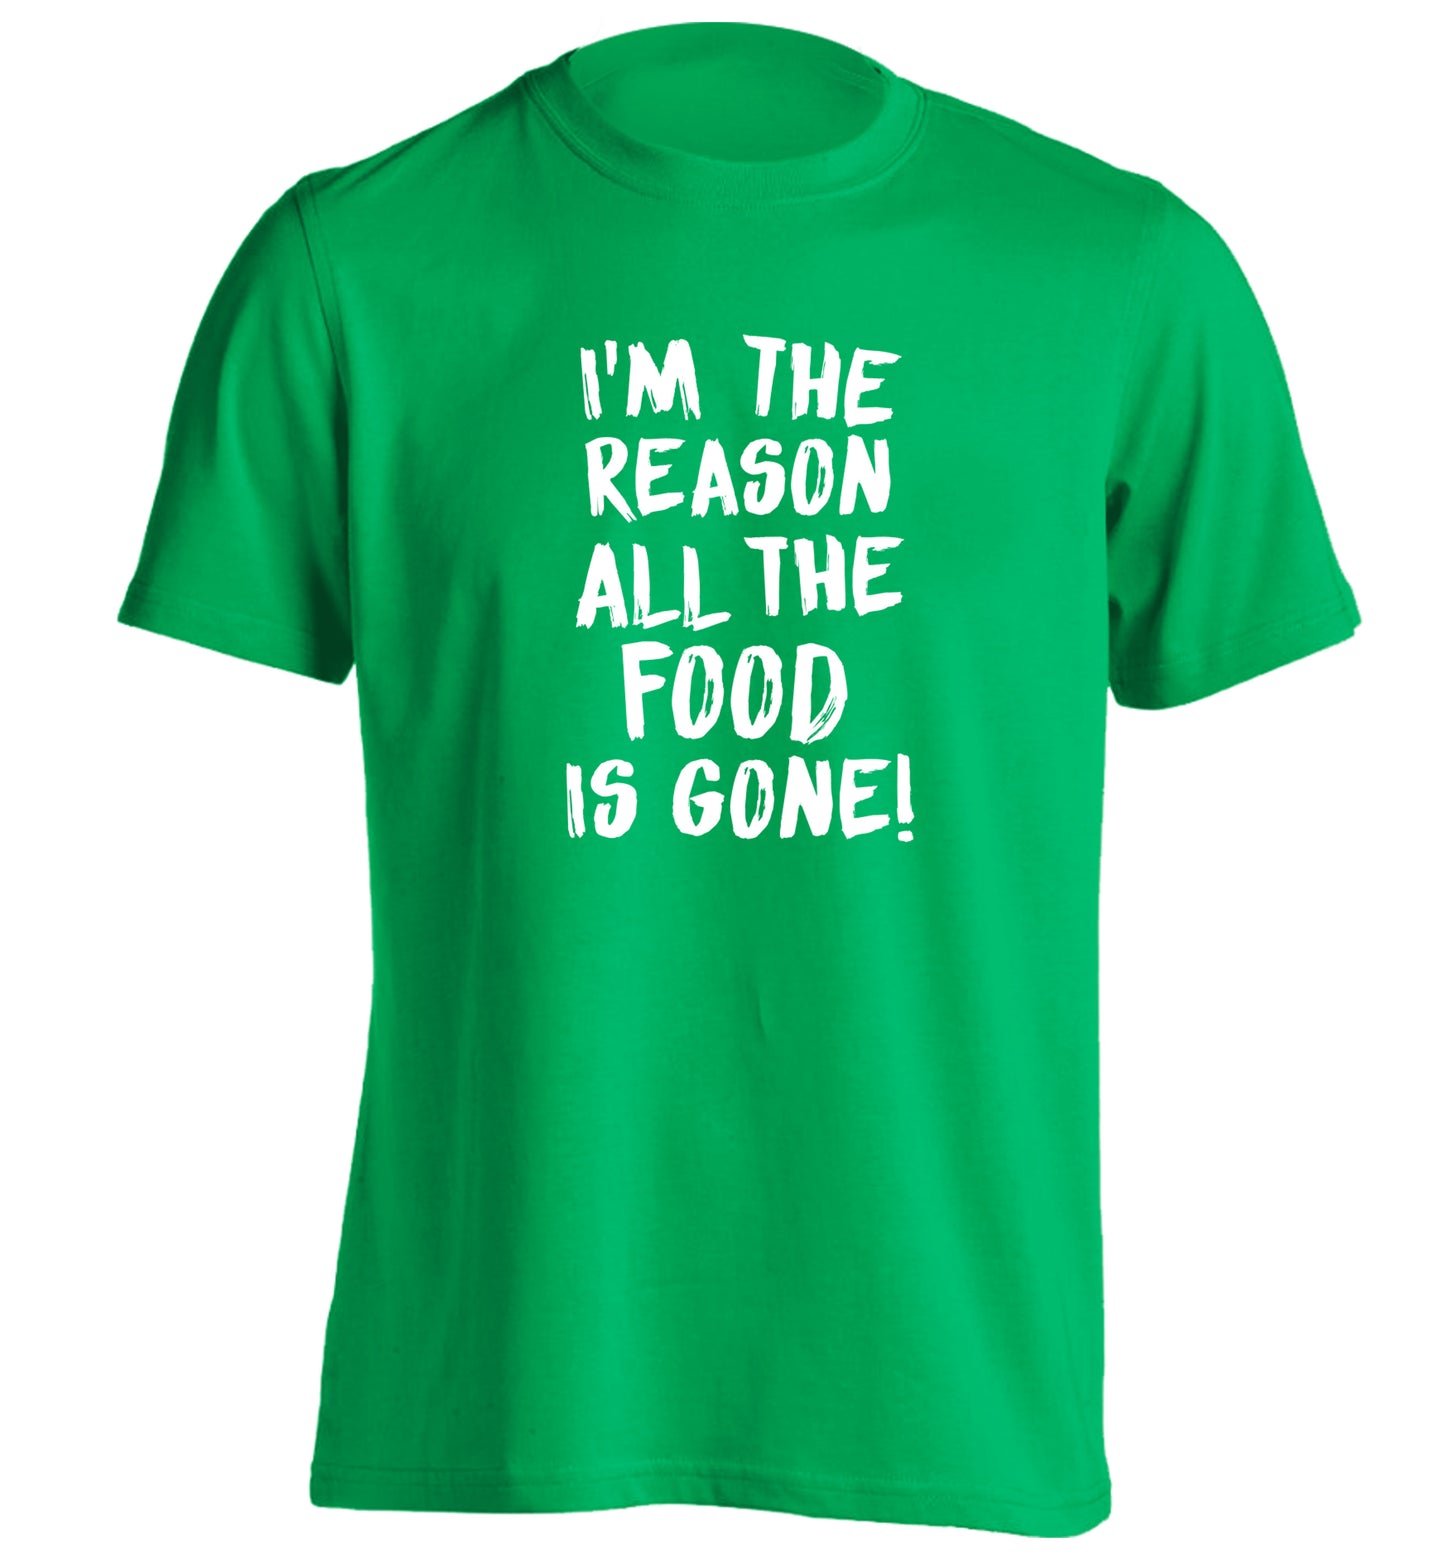 I'm the reason why all the food is gone adults unisex green Tshirt 2XL